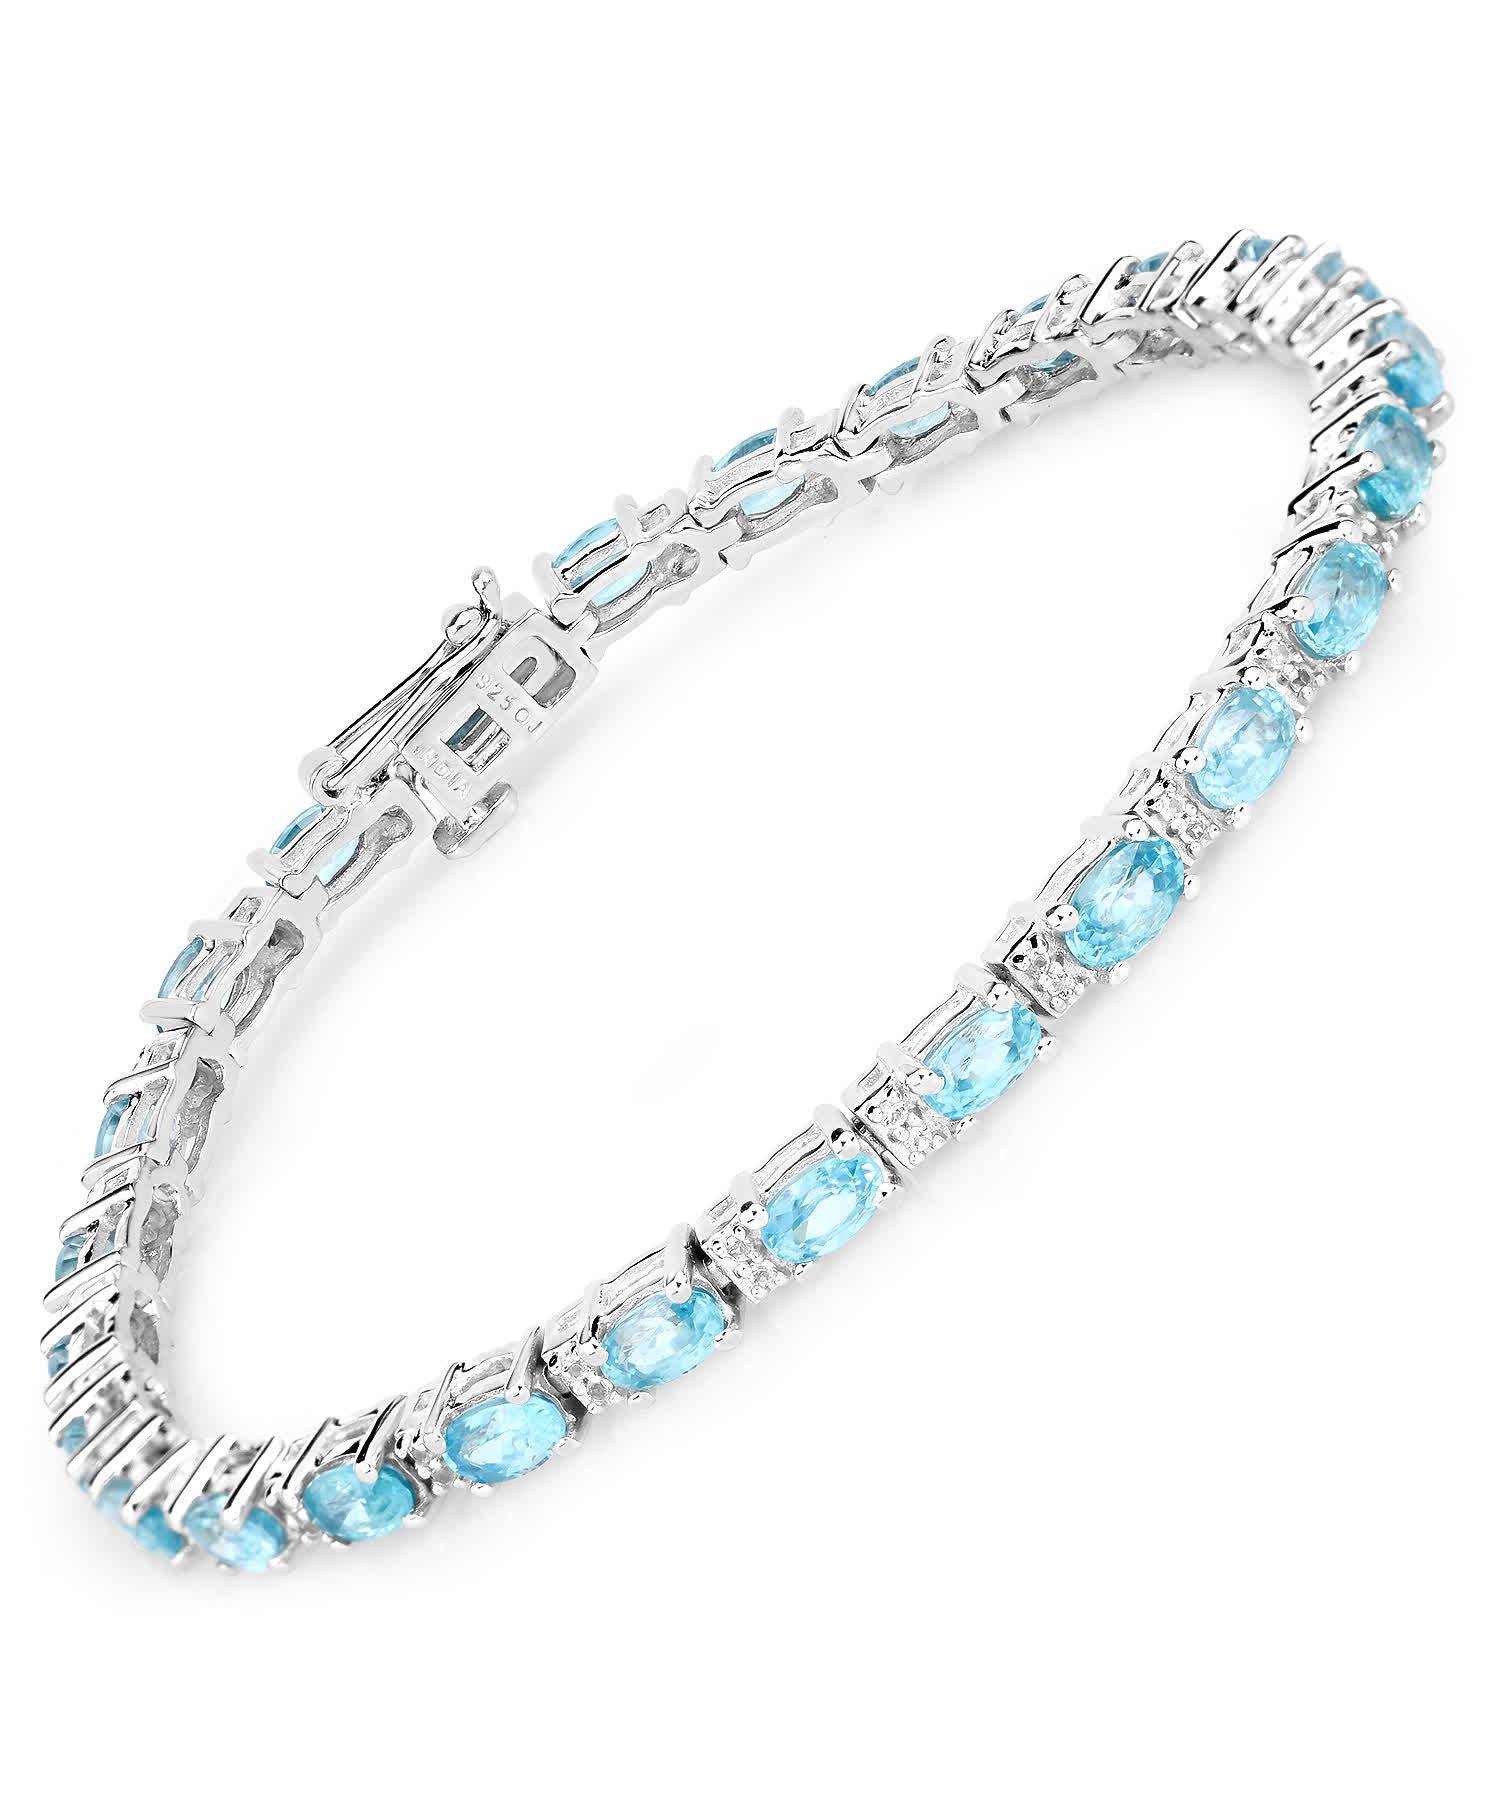 8.84ctw Natural Zircon and Topaz Rhodium Plated 925 Sterling Silver Tennis Bracelet View 1